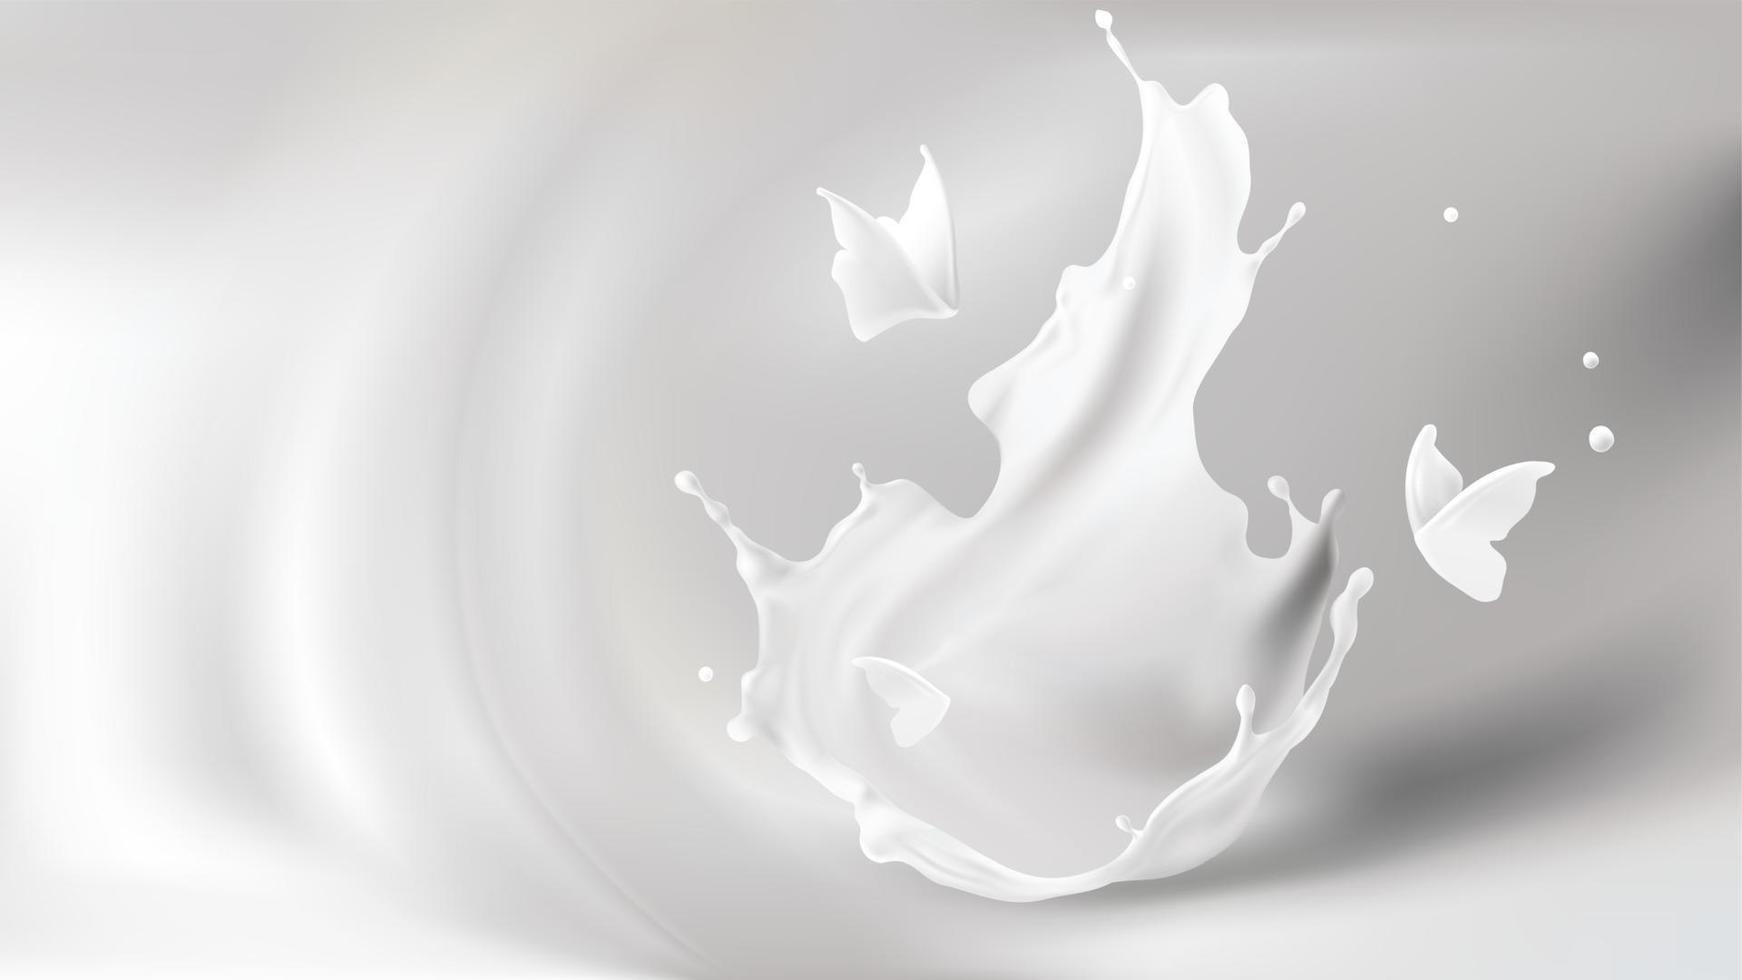 Milk splash, crown shape and butterfly silhouettes vector